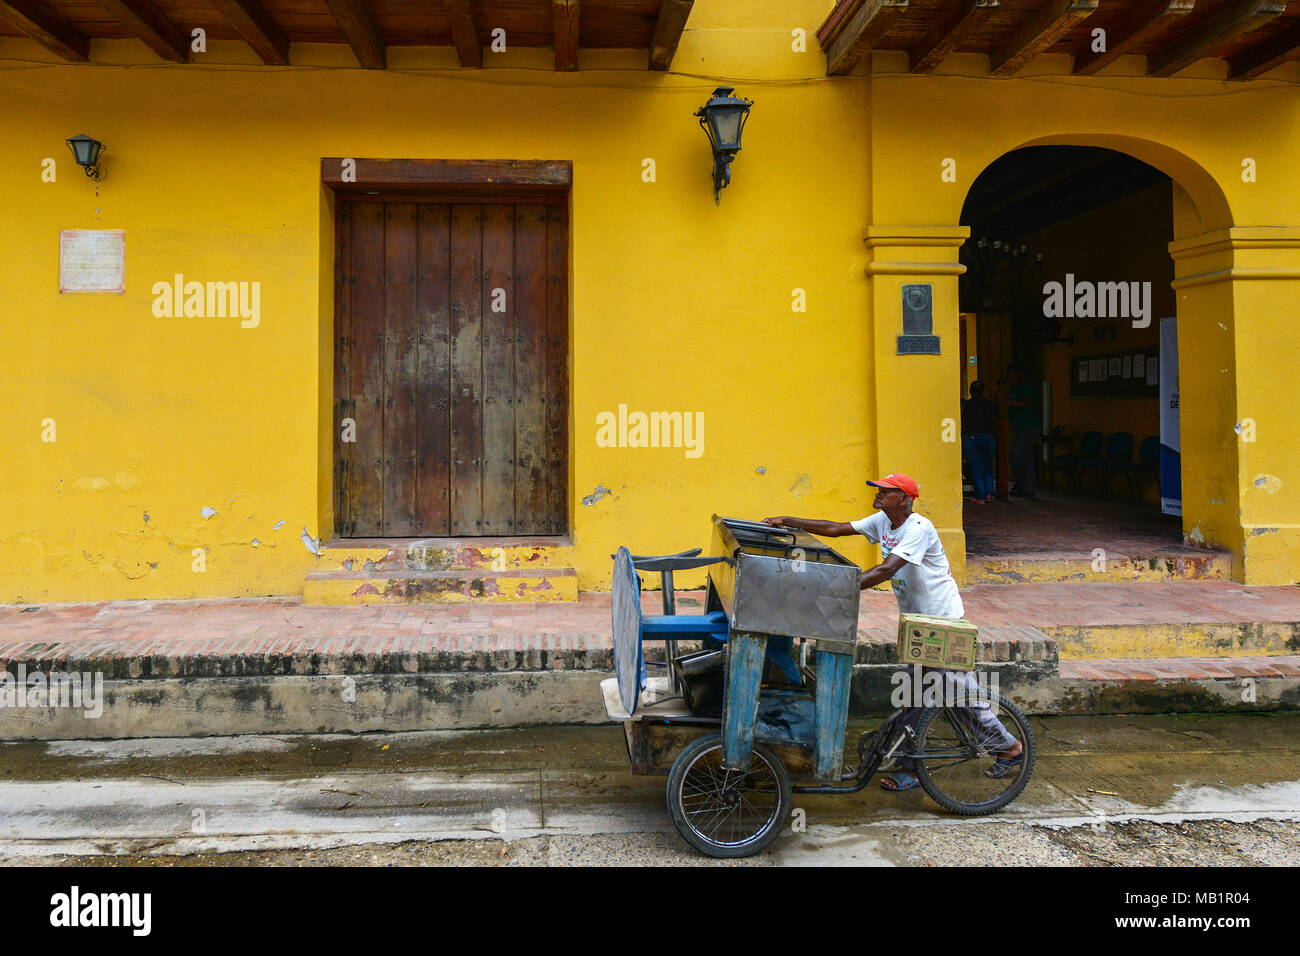 Mompox, Colombia - August 8, 2017: An unidentified man on a tricycle down a street in Mompox, Colombia. Stock Photo